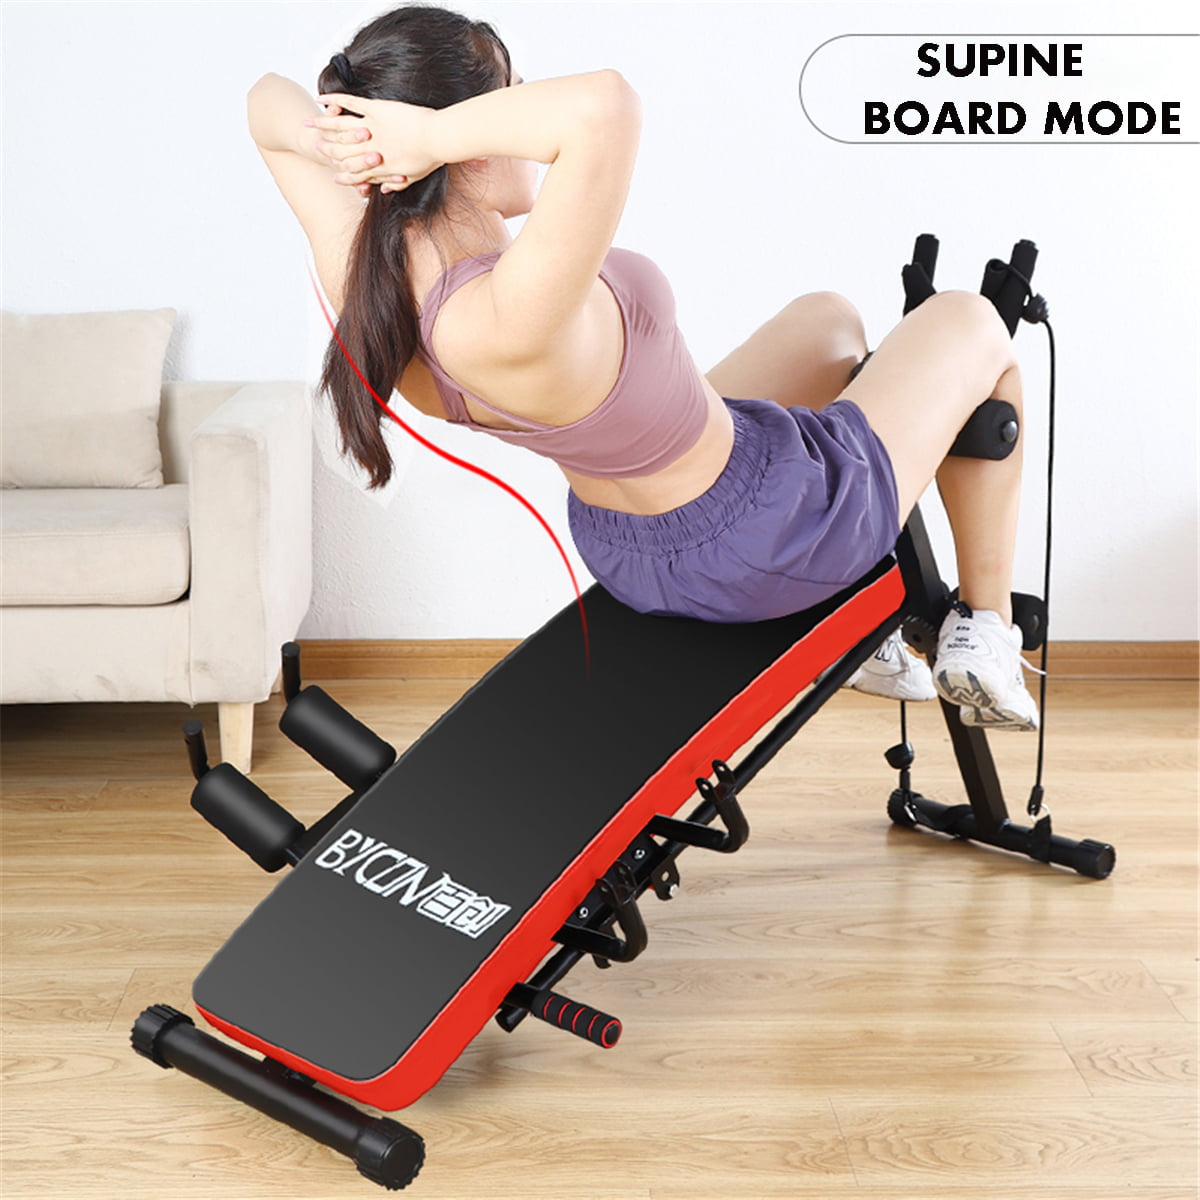 Sit Up Bench Decline Abdominal Fitness Home Gym Exercise Workout Equipment US 